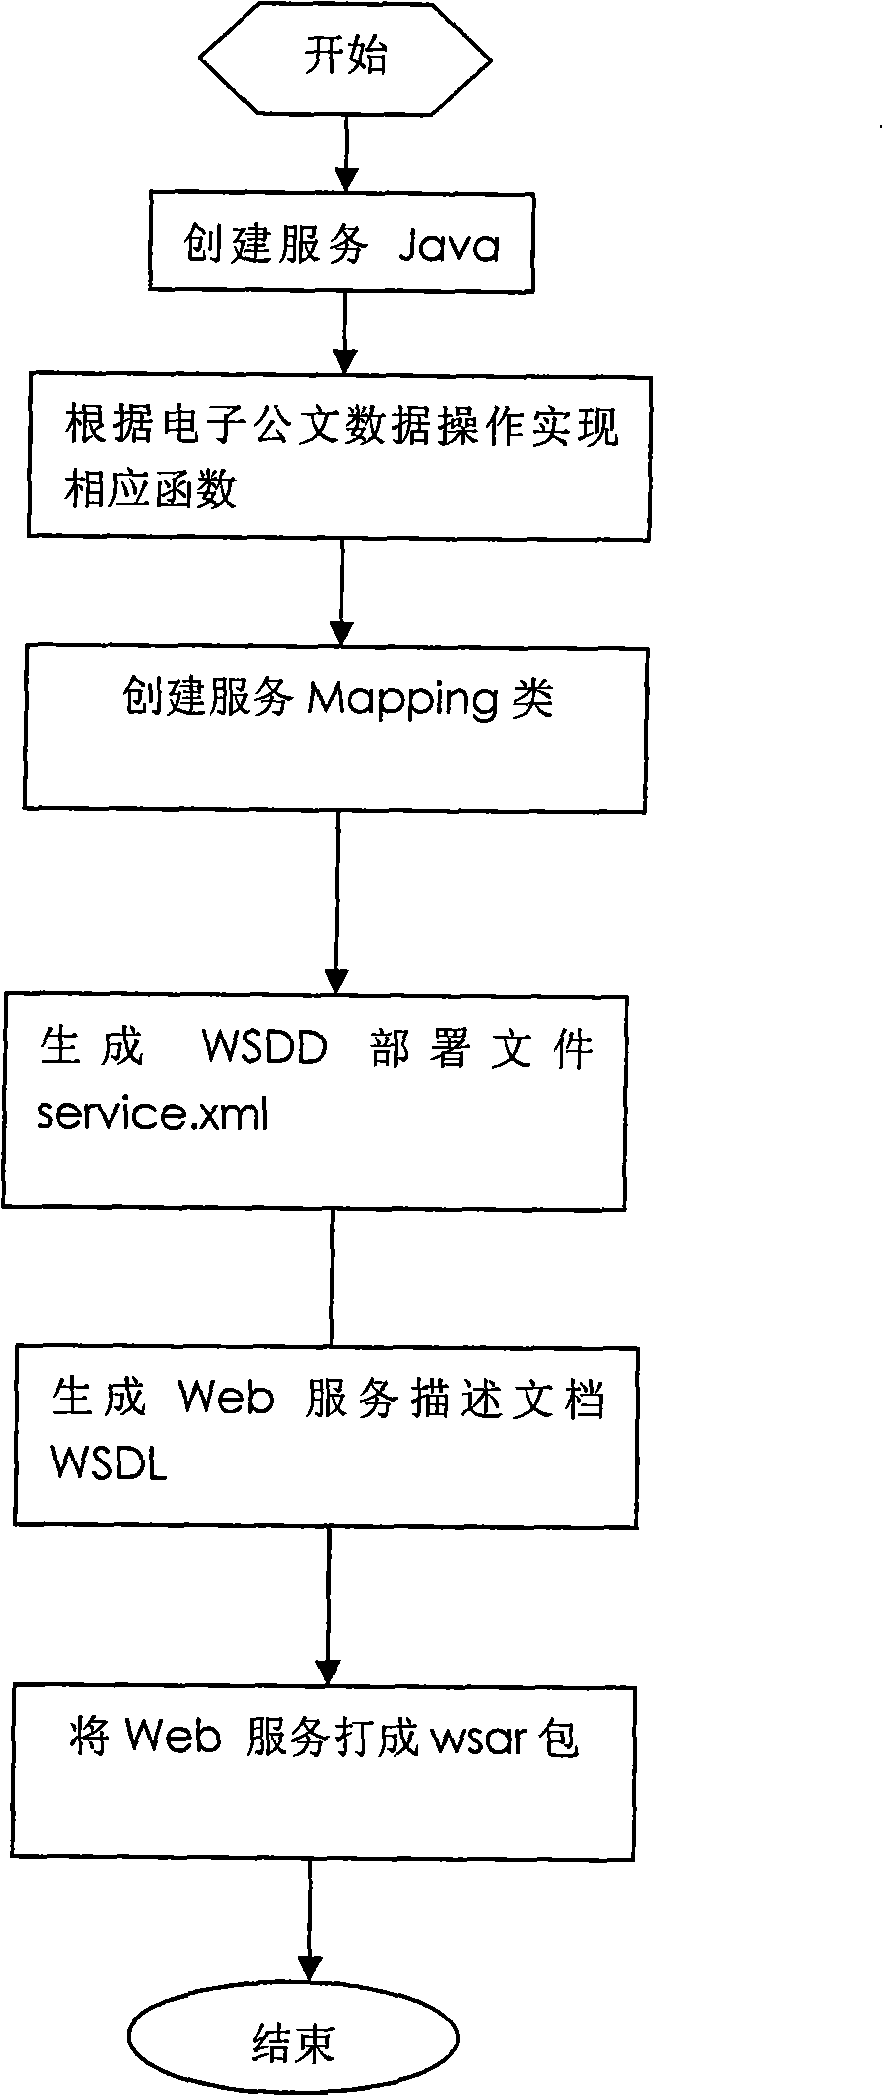 Electronic government documents exchanging method based on web service